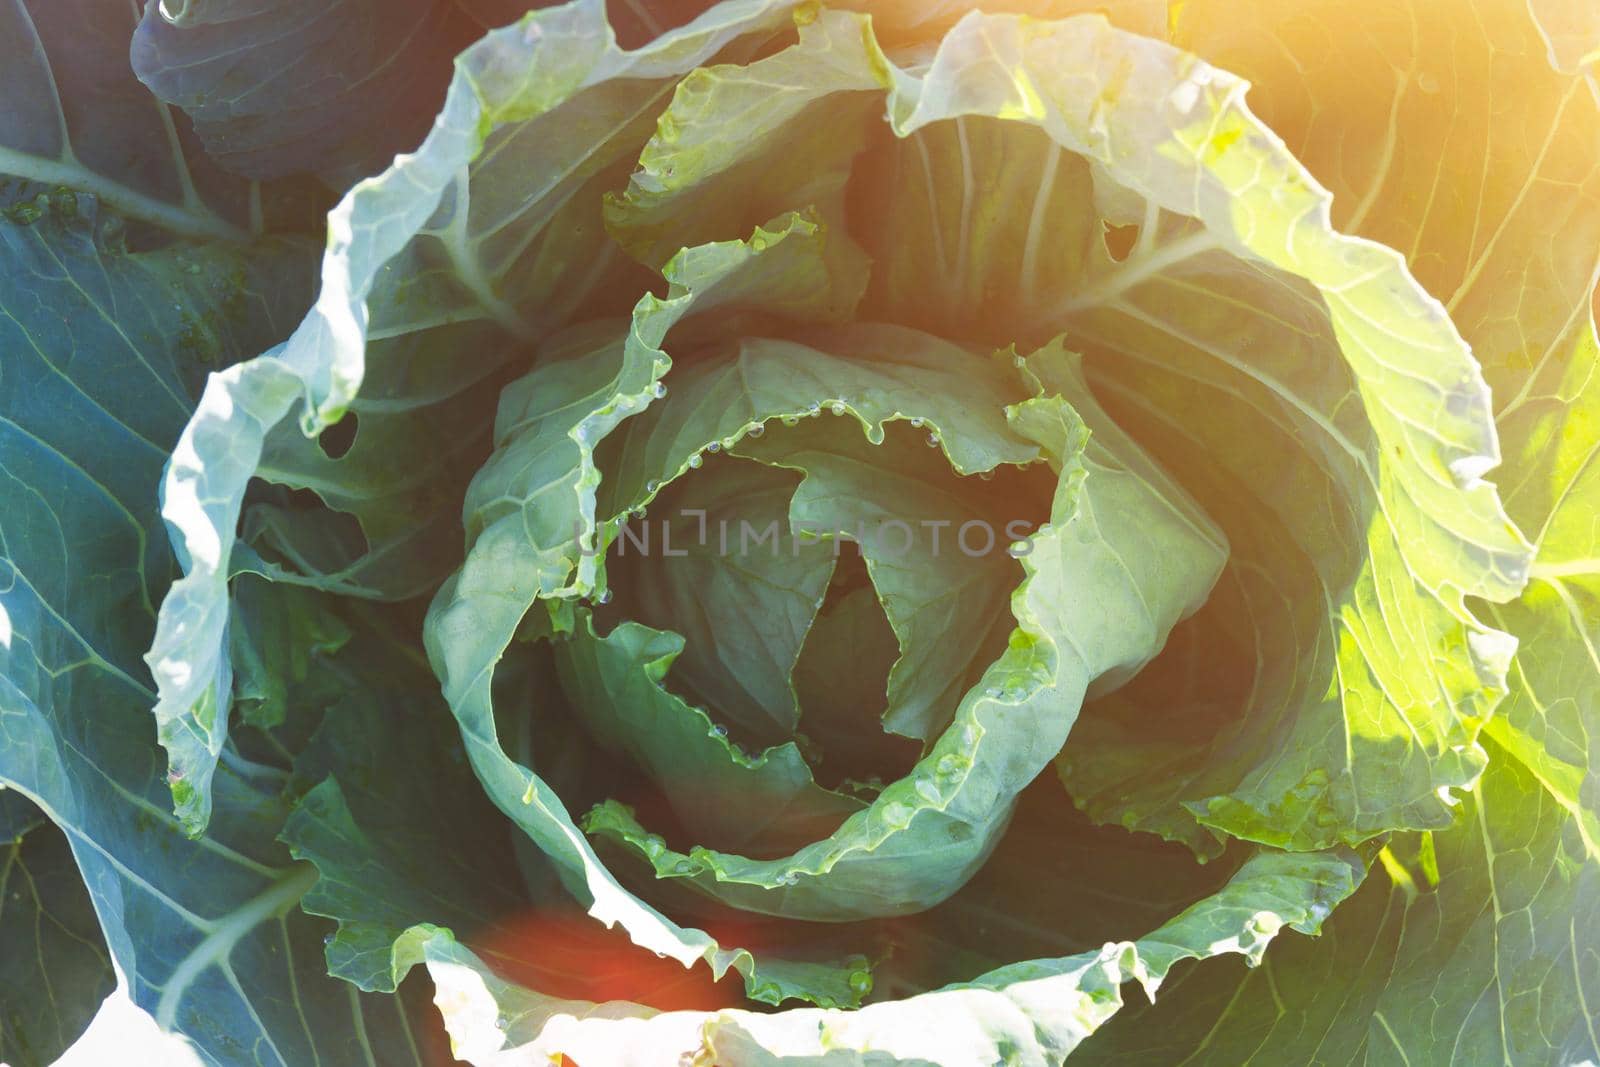 Cabbage in bright sunlight. Concept of natural products. Cultivation of ecologically natural varieties. Texture of lettuce leaves close-up.